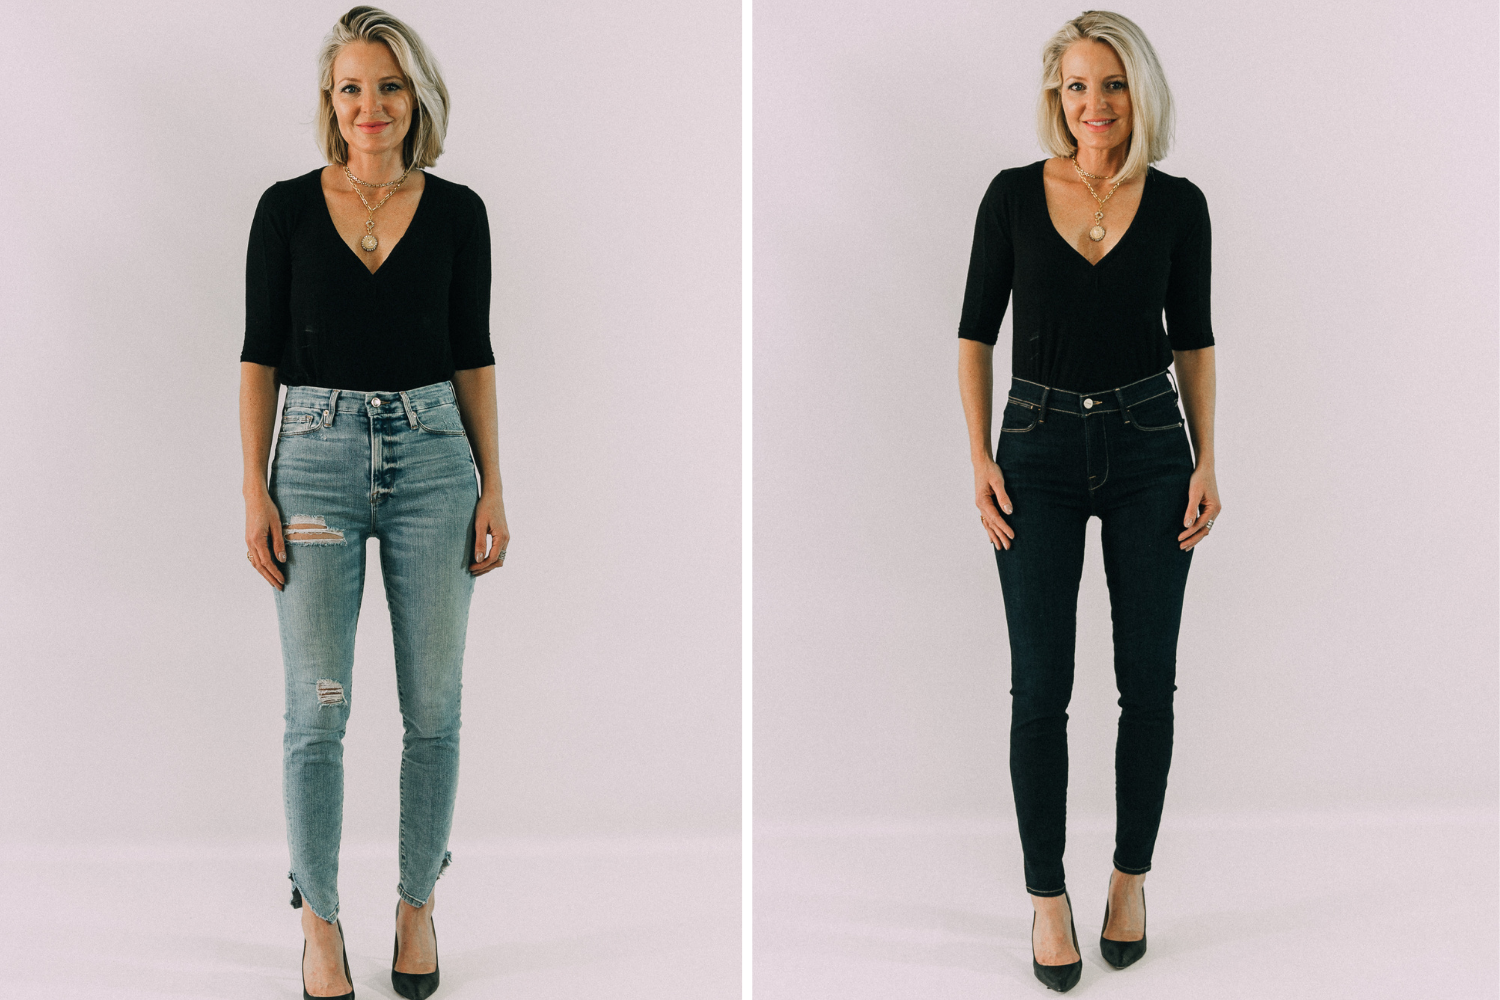 How To Make Your Old Jeans Fit With The Thigh Slimmer Shapewear by